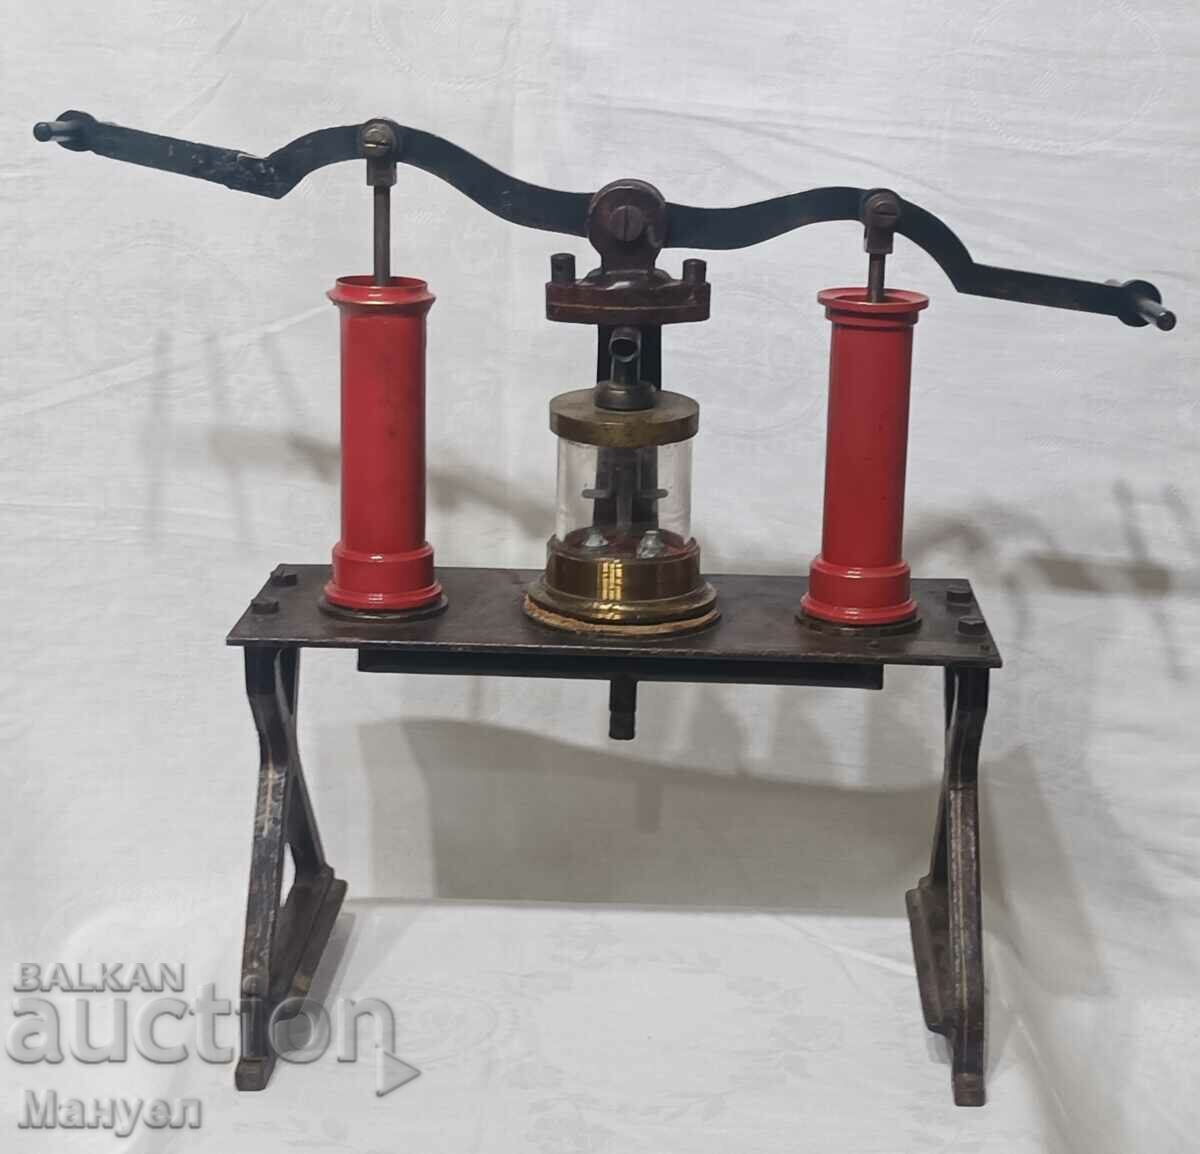 Old technical model of a fire pump..